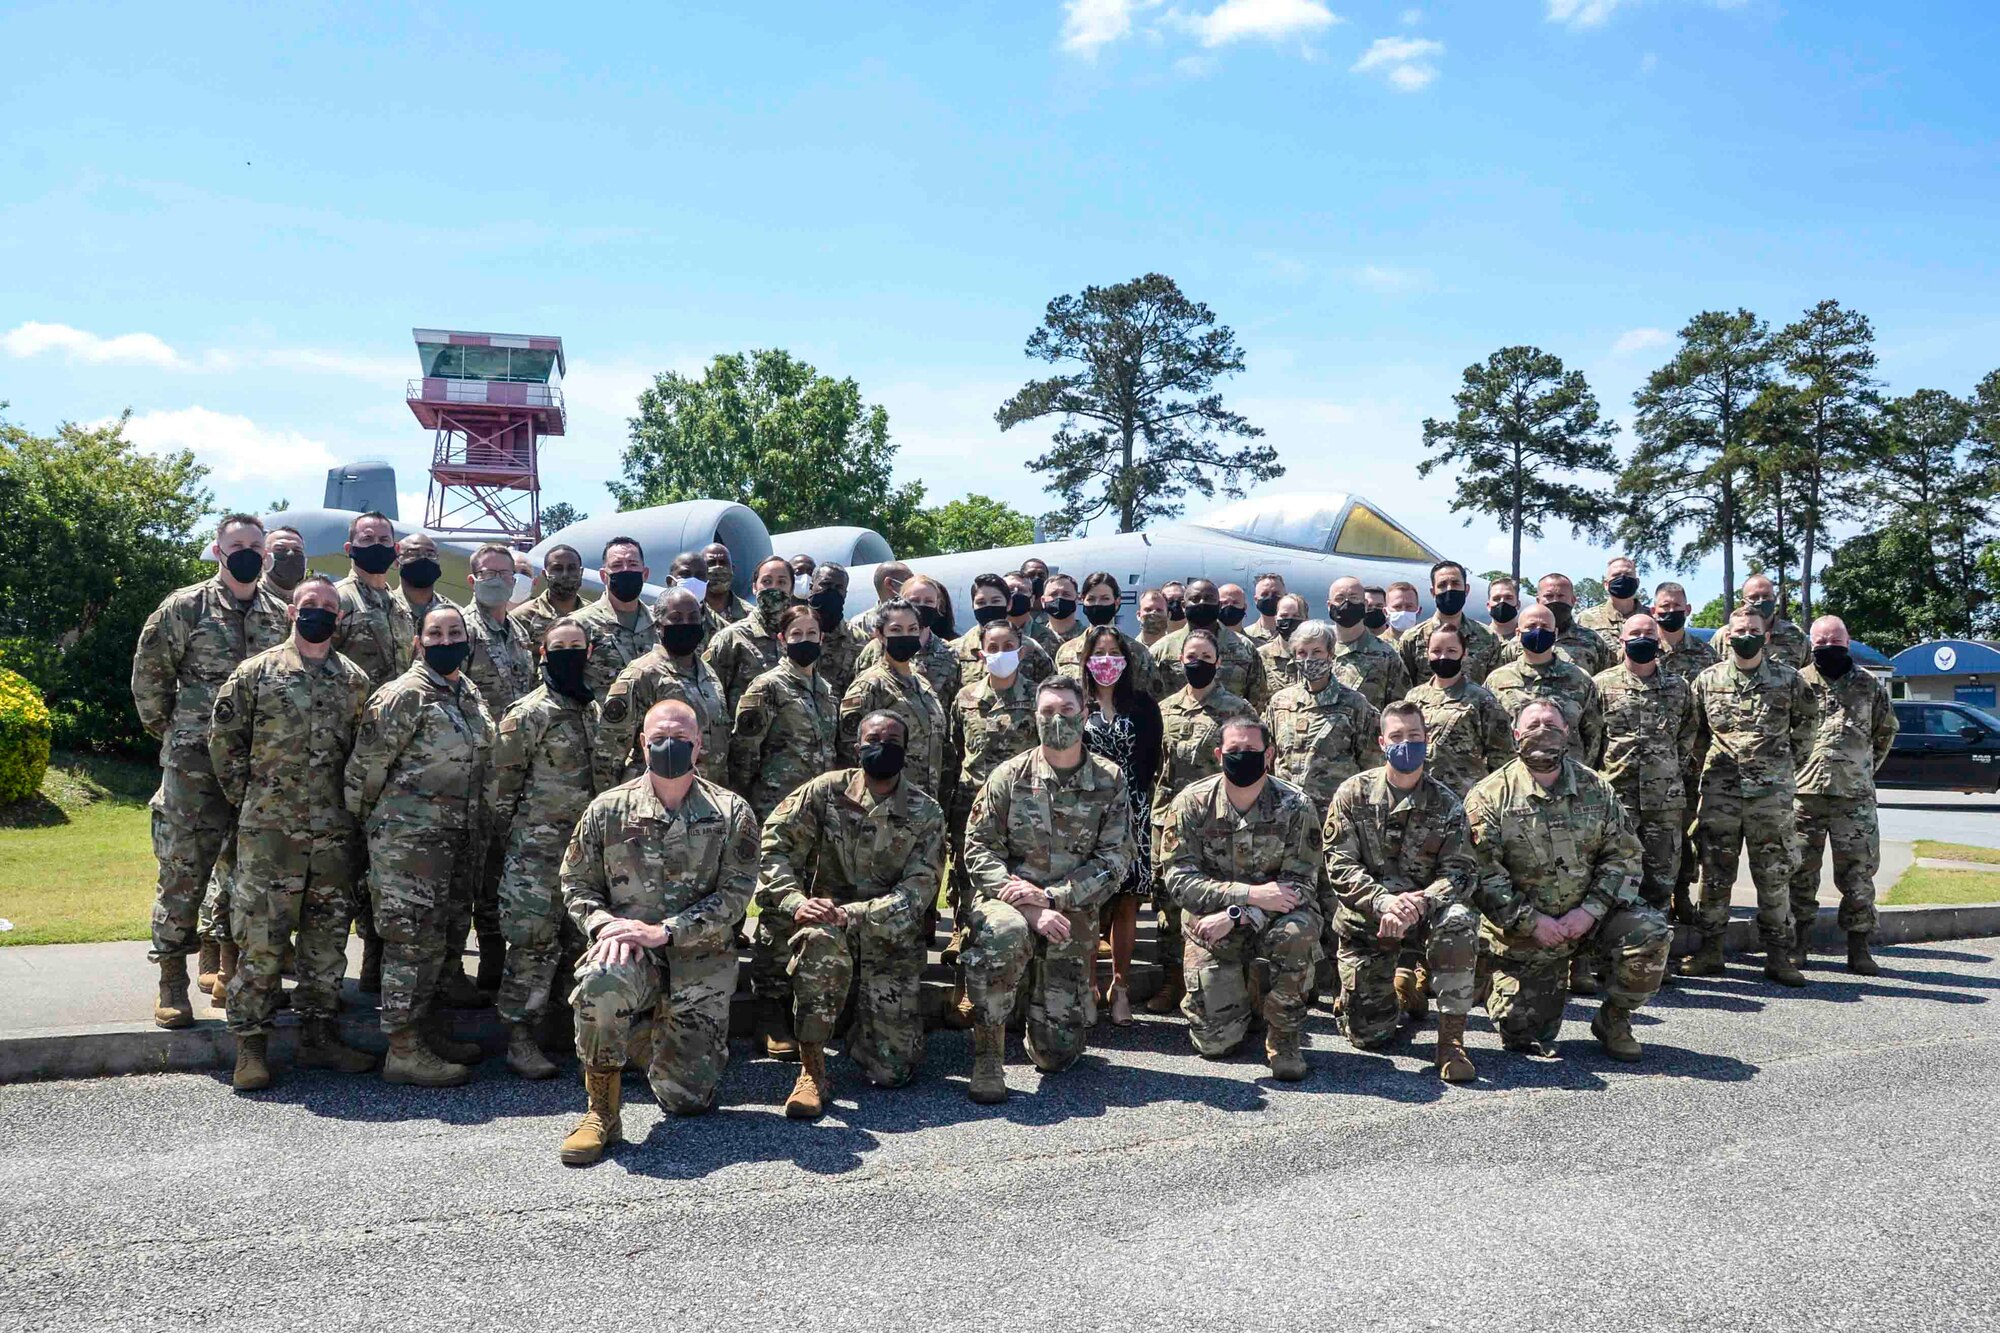 Reserve Citizen Airmen in physical attendance of the 960th Cyberspace Wing 2021 Leadership Summit at Robins Air Force Base, Georgia, pause for a photograph April 27, 2021. (U.S. Air Force photo by Tech. Sgt. Samantha Mathison)